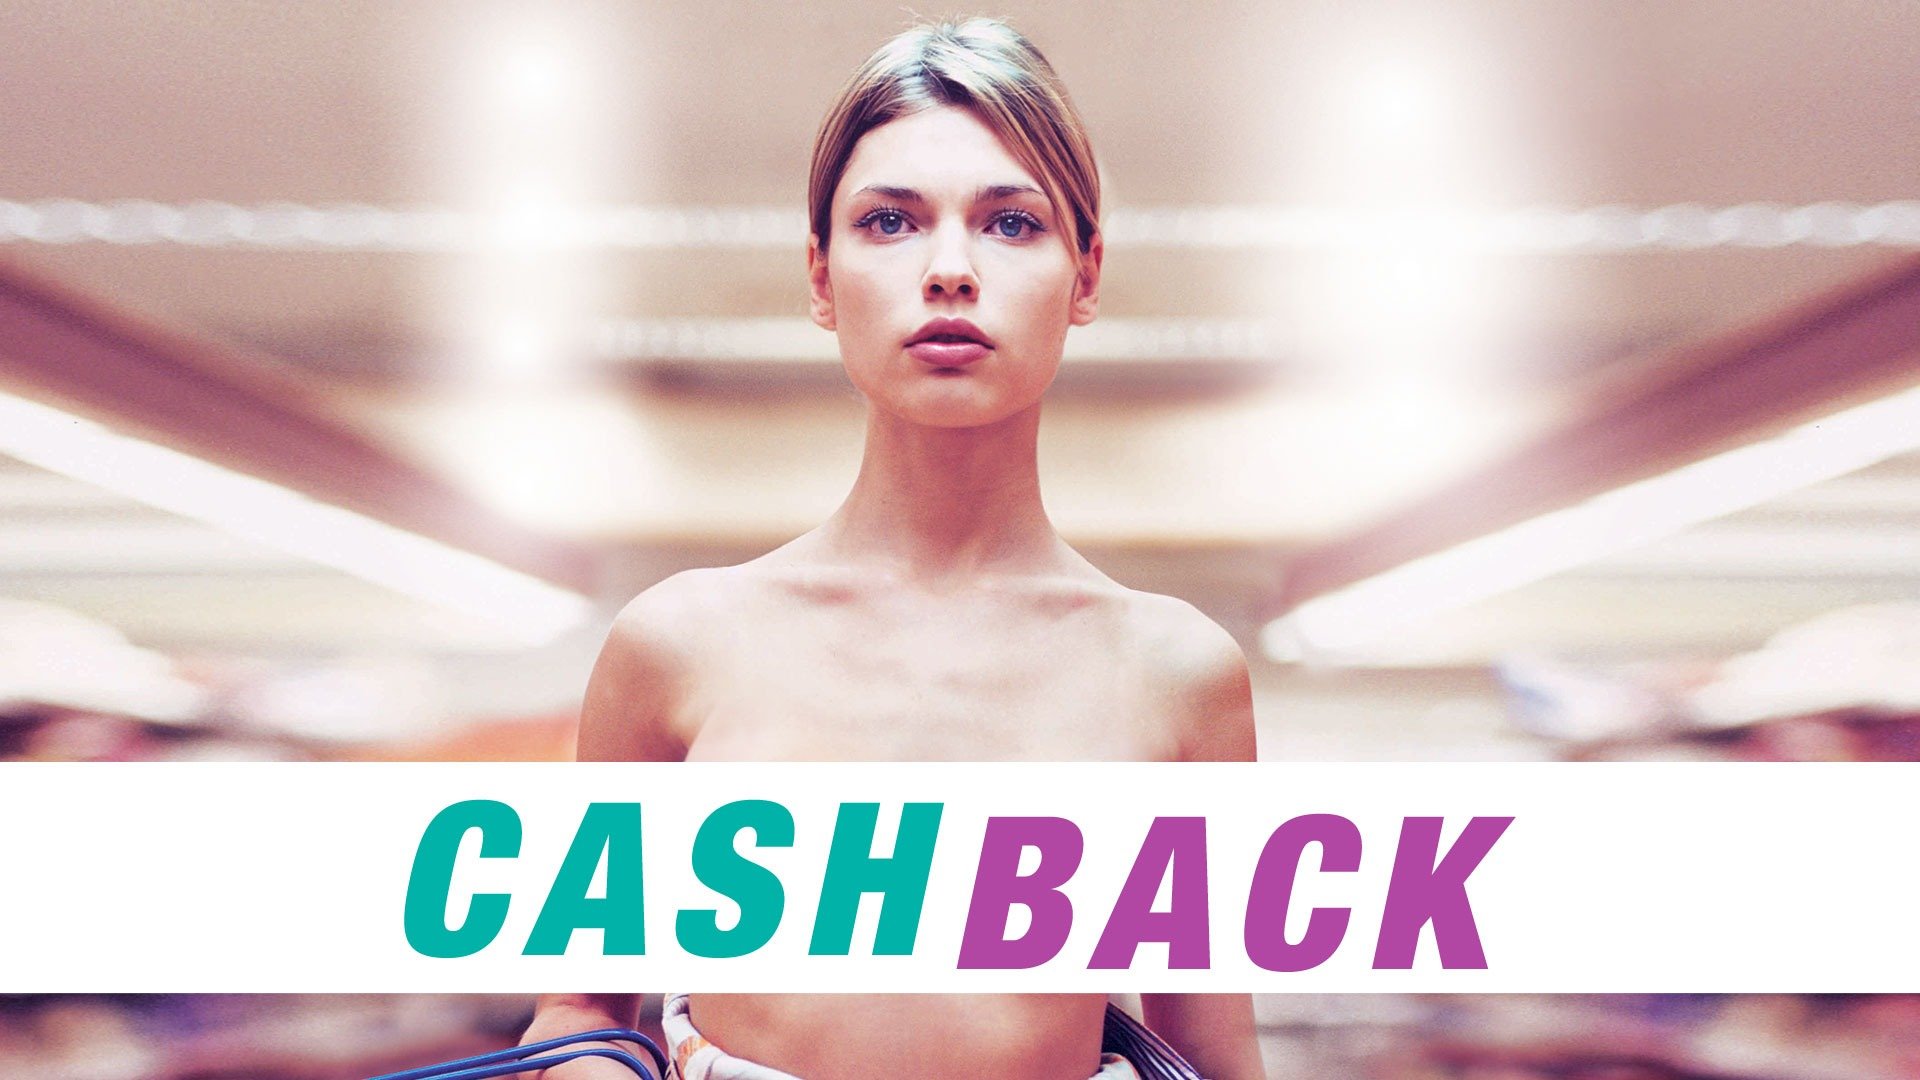 46-facts-about-the-movie-cashback